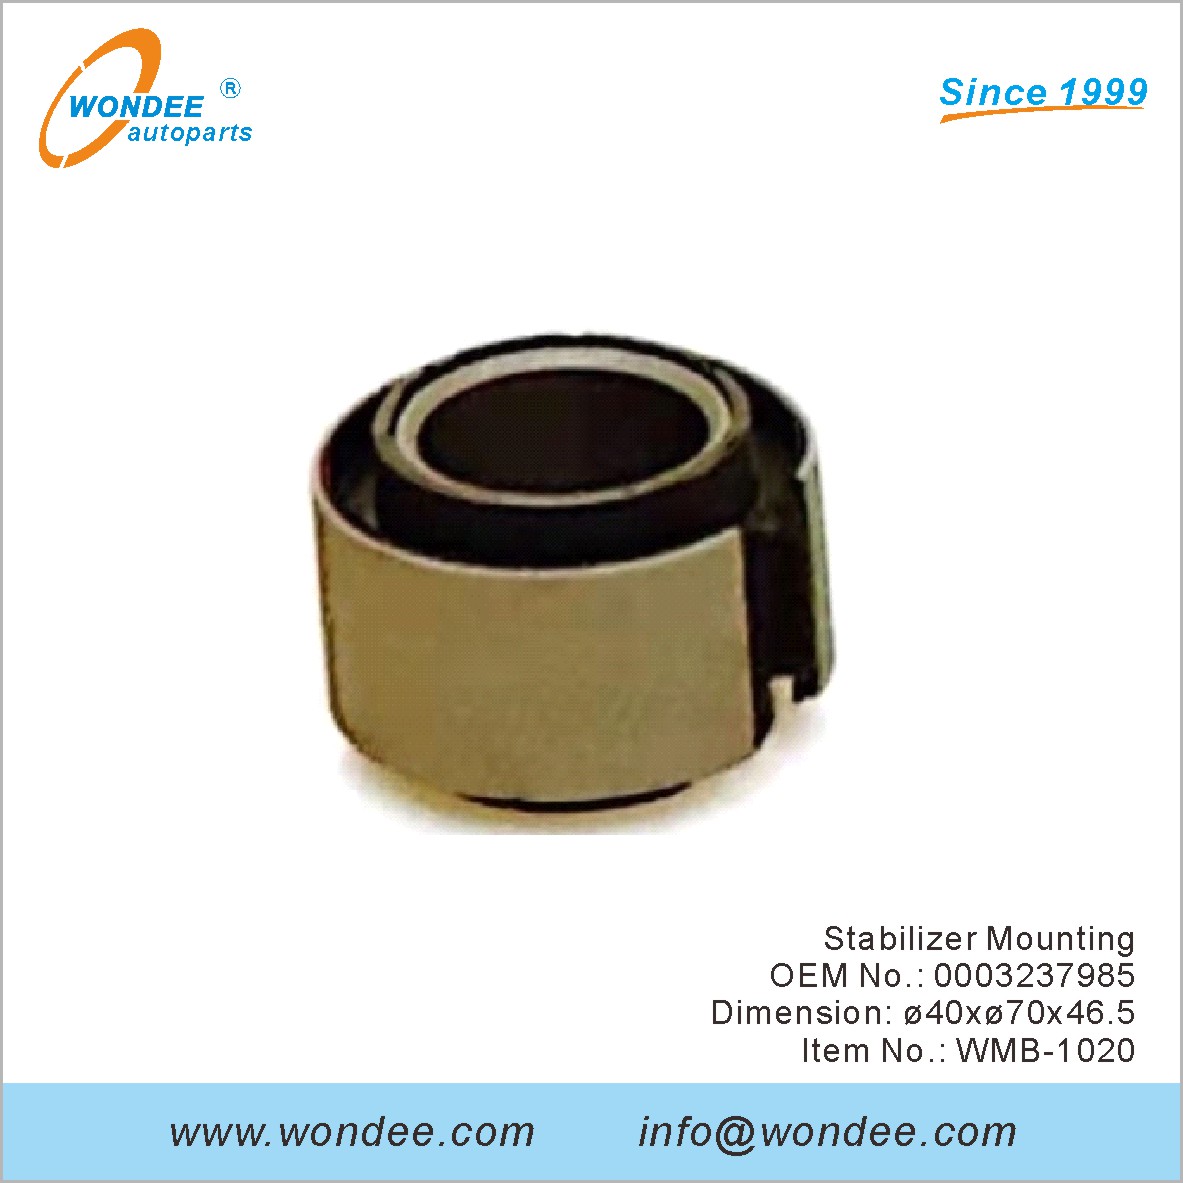 Stabilizer Mounting OEM 0003237985 for Benz from WONDEE